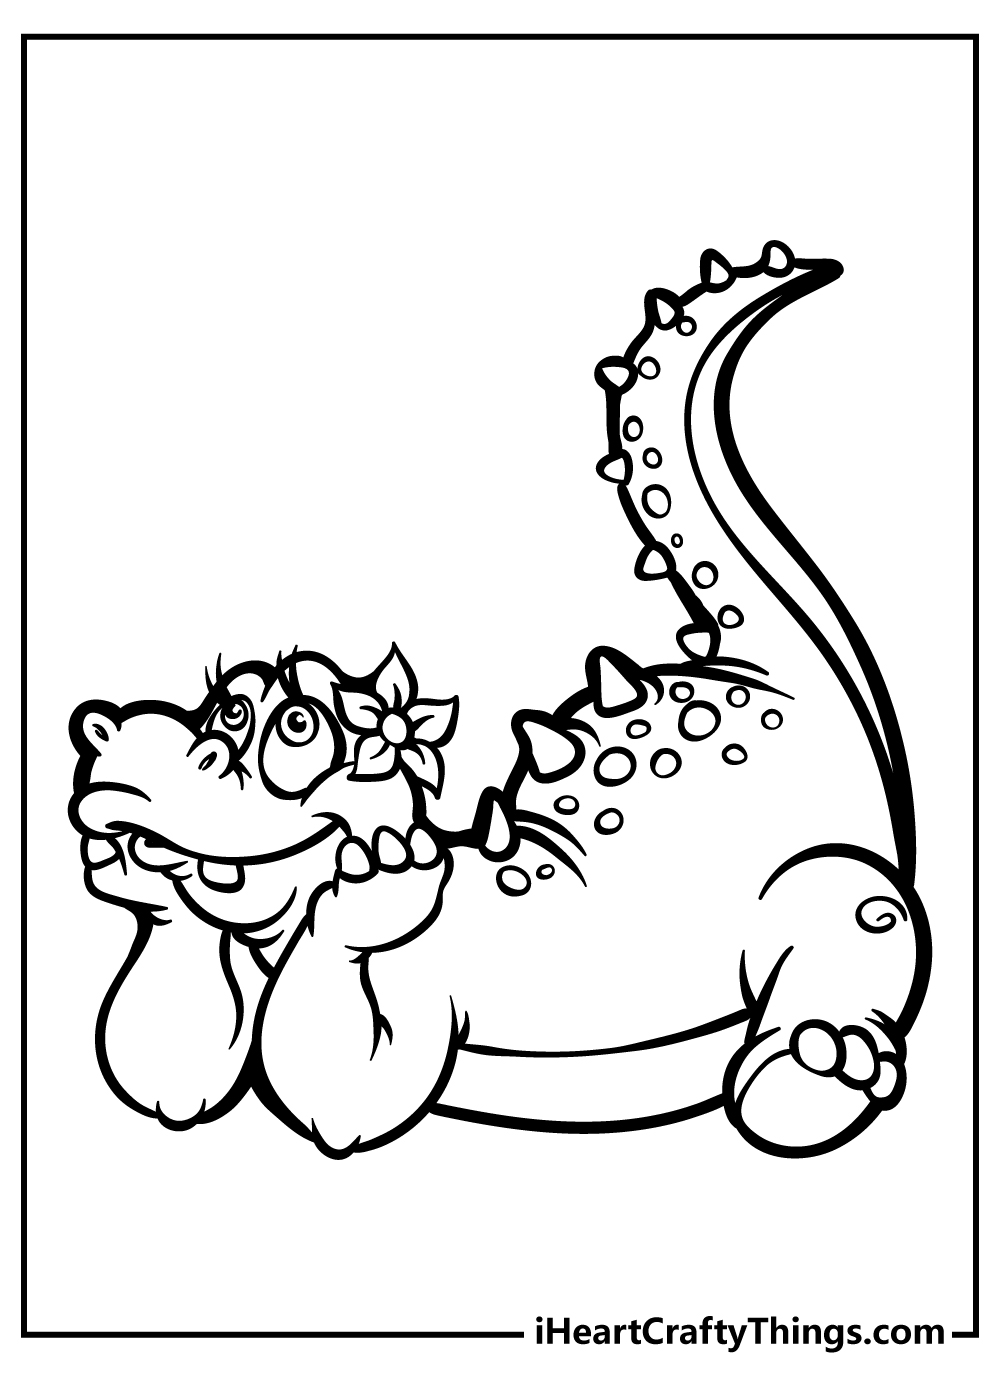 Baby Dinosaur Coloring Book for kids free printable